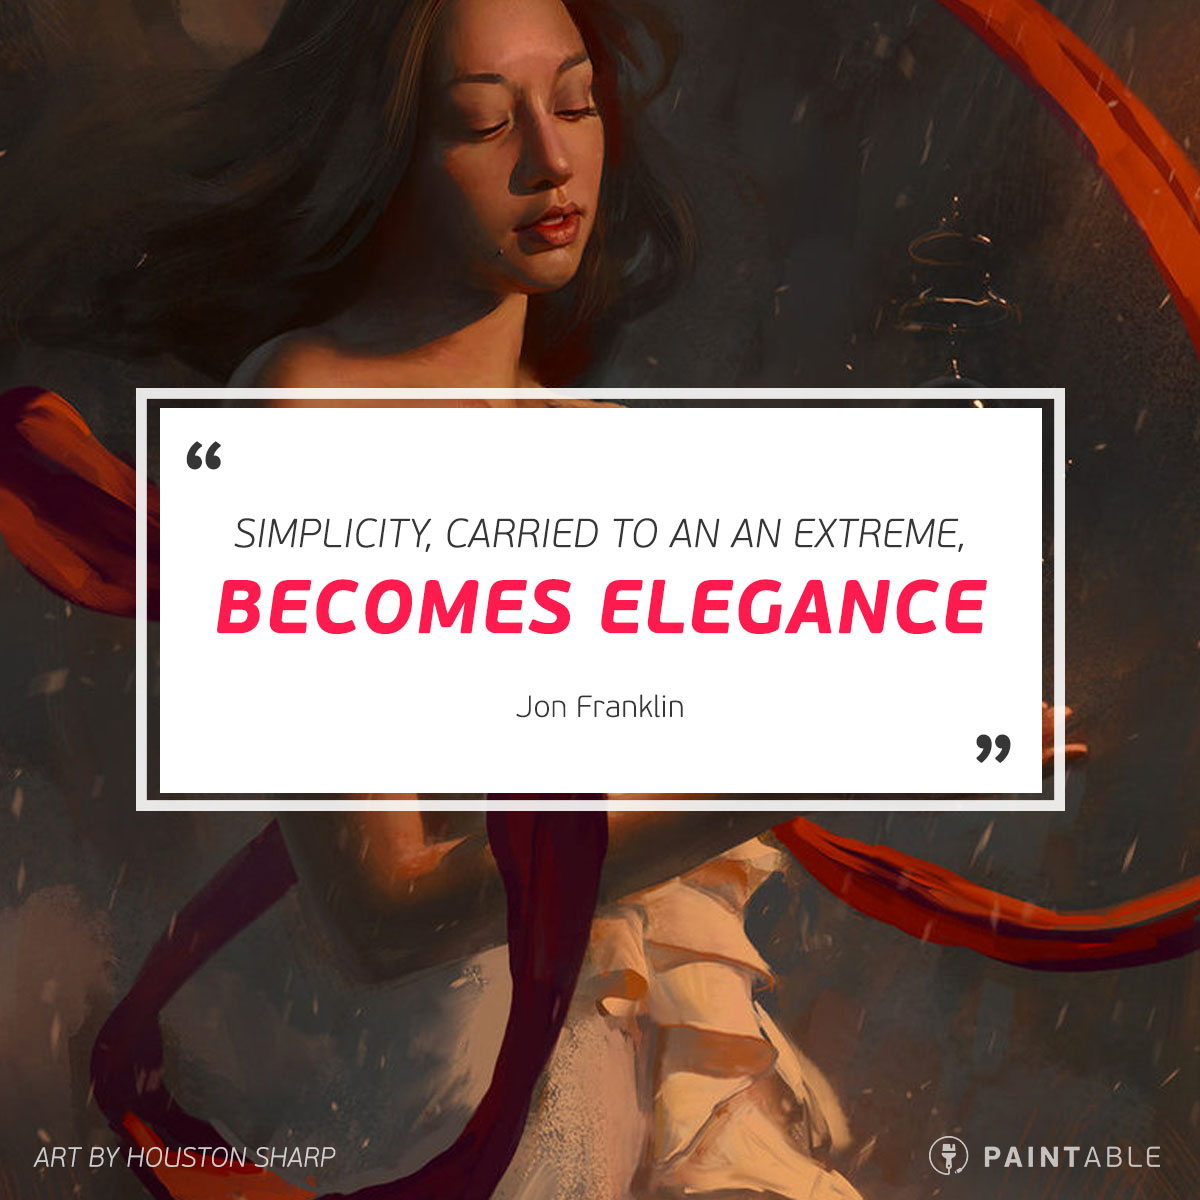 Houston Sharp | 25 Inspirational Artist Quotes for Creatives and Digital Painters